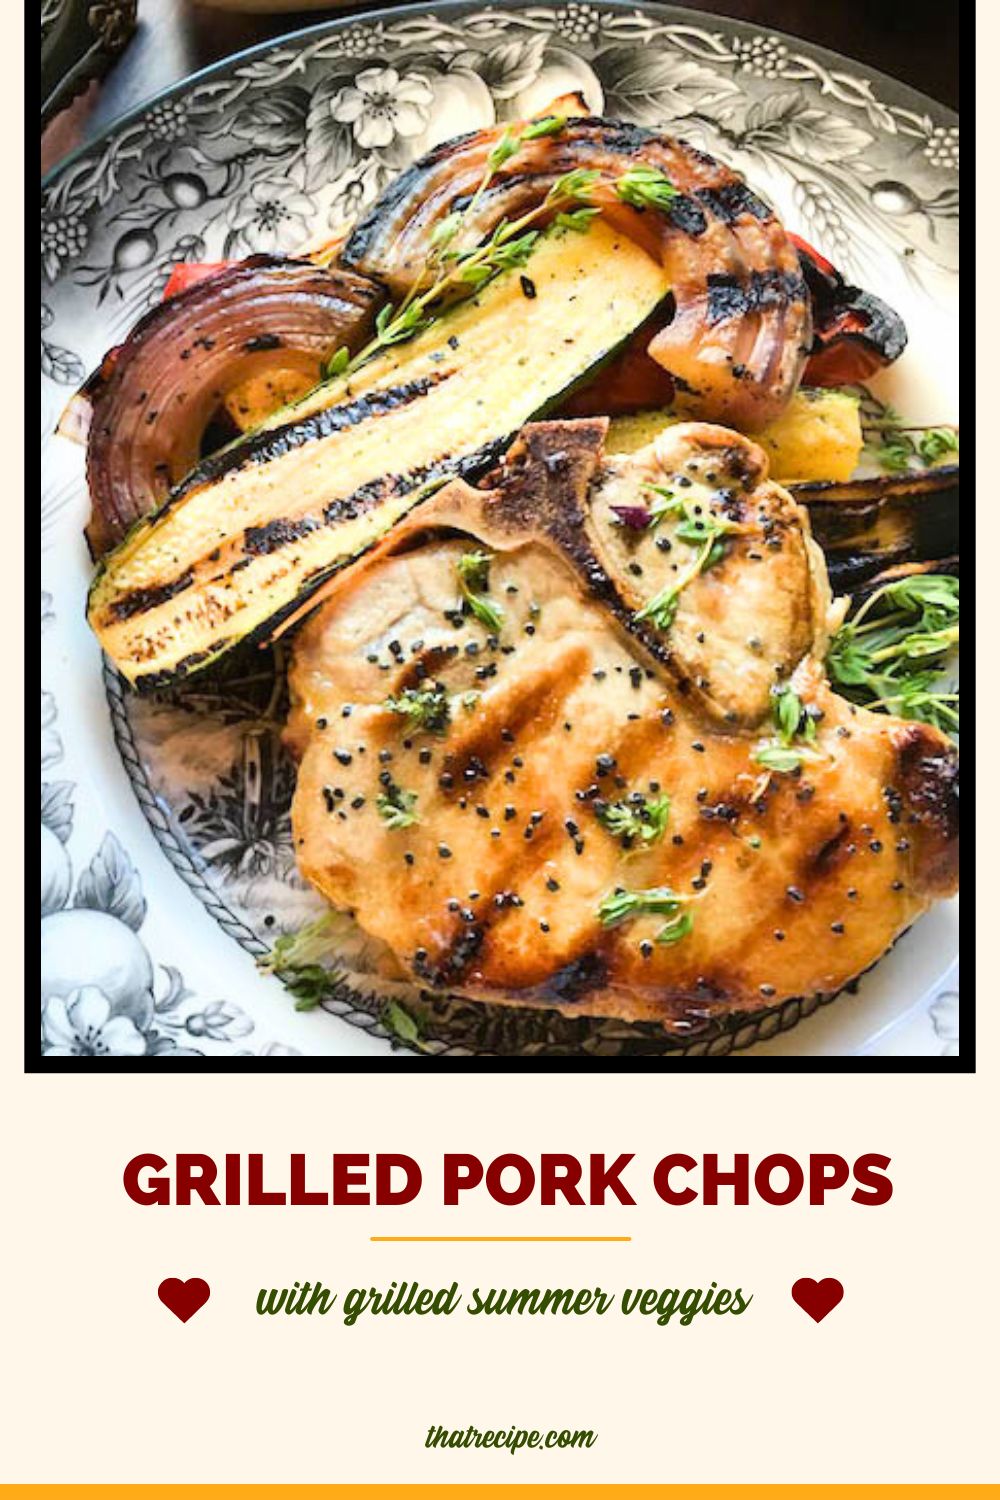 grilled pork chop and vegetables on a plate